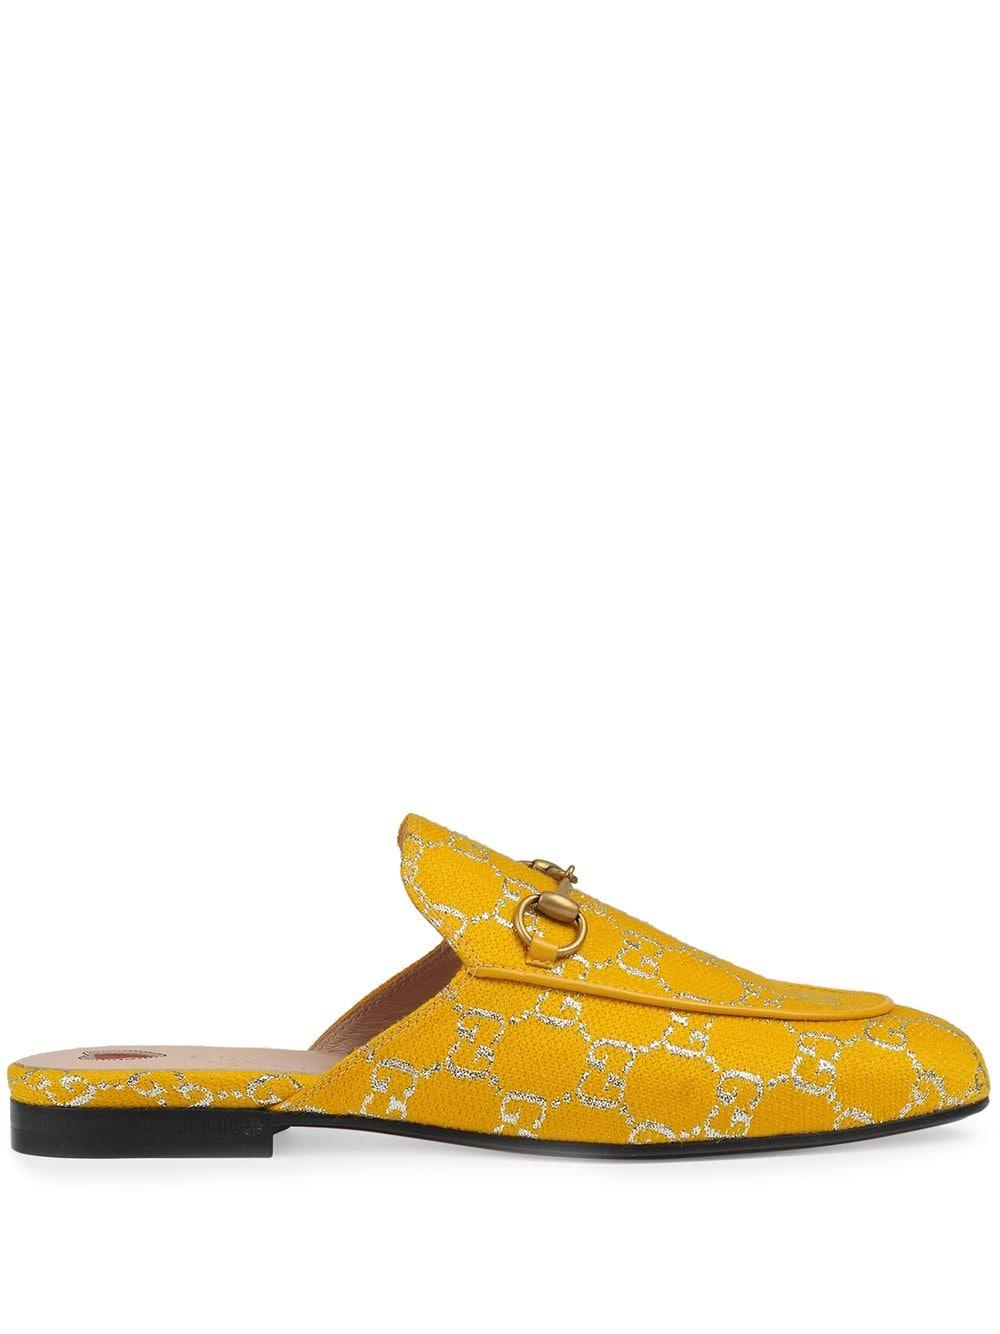 Gucci Princetown GG Supreme Mule in Yellow | Lyst